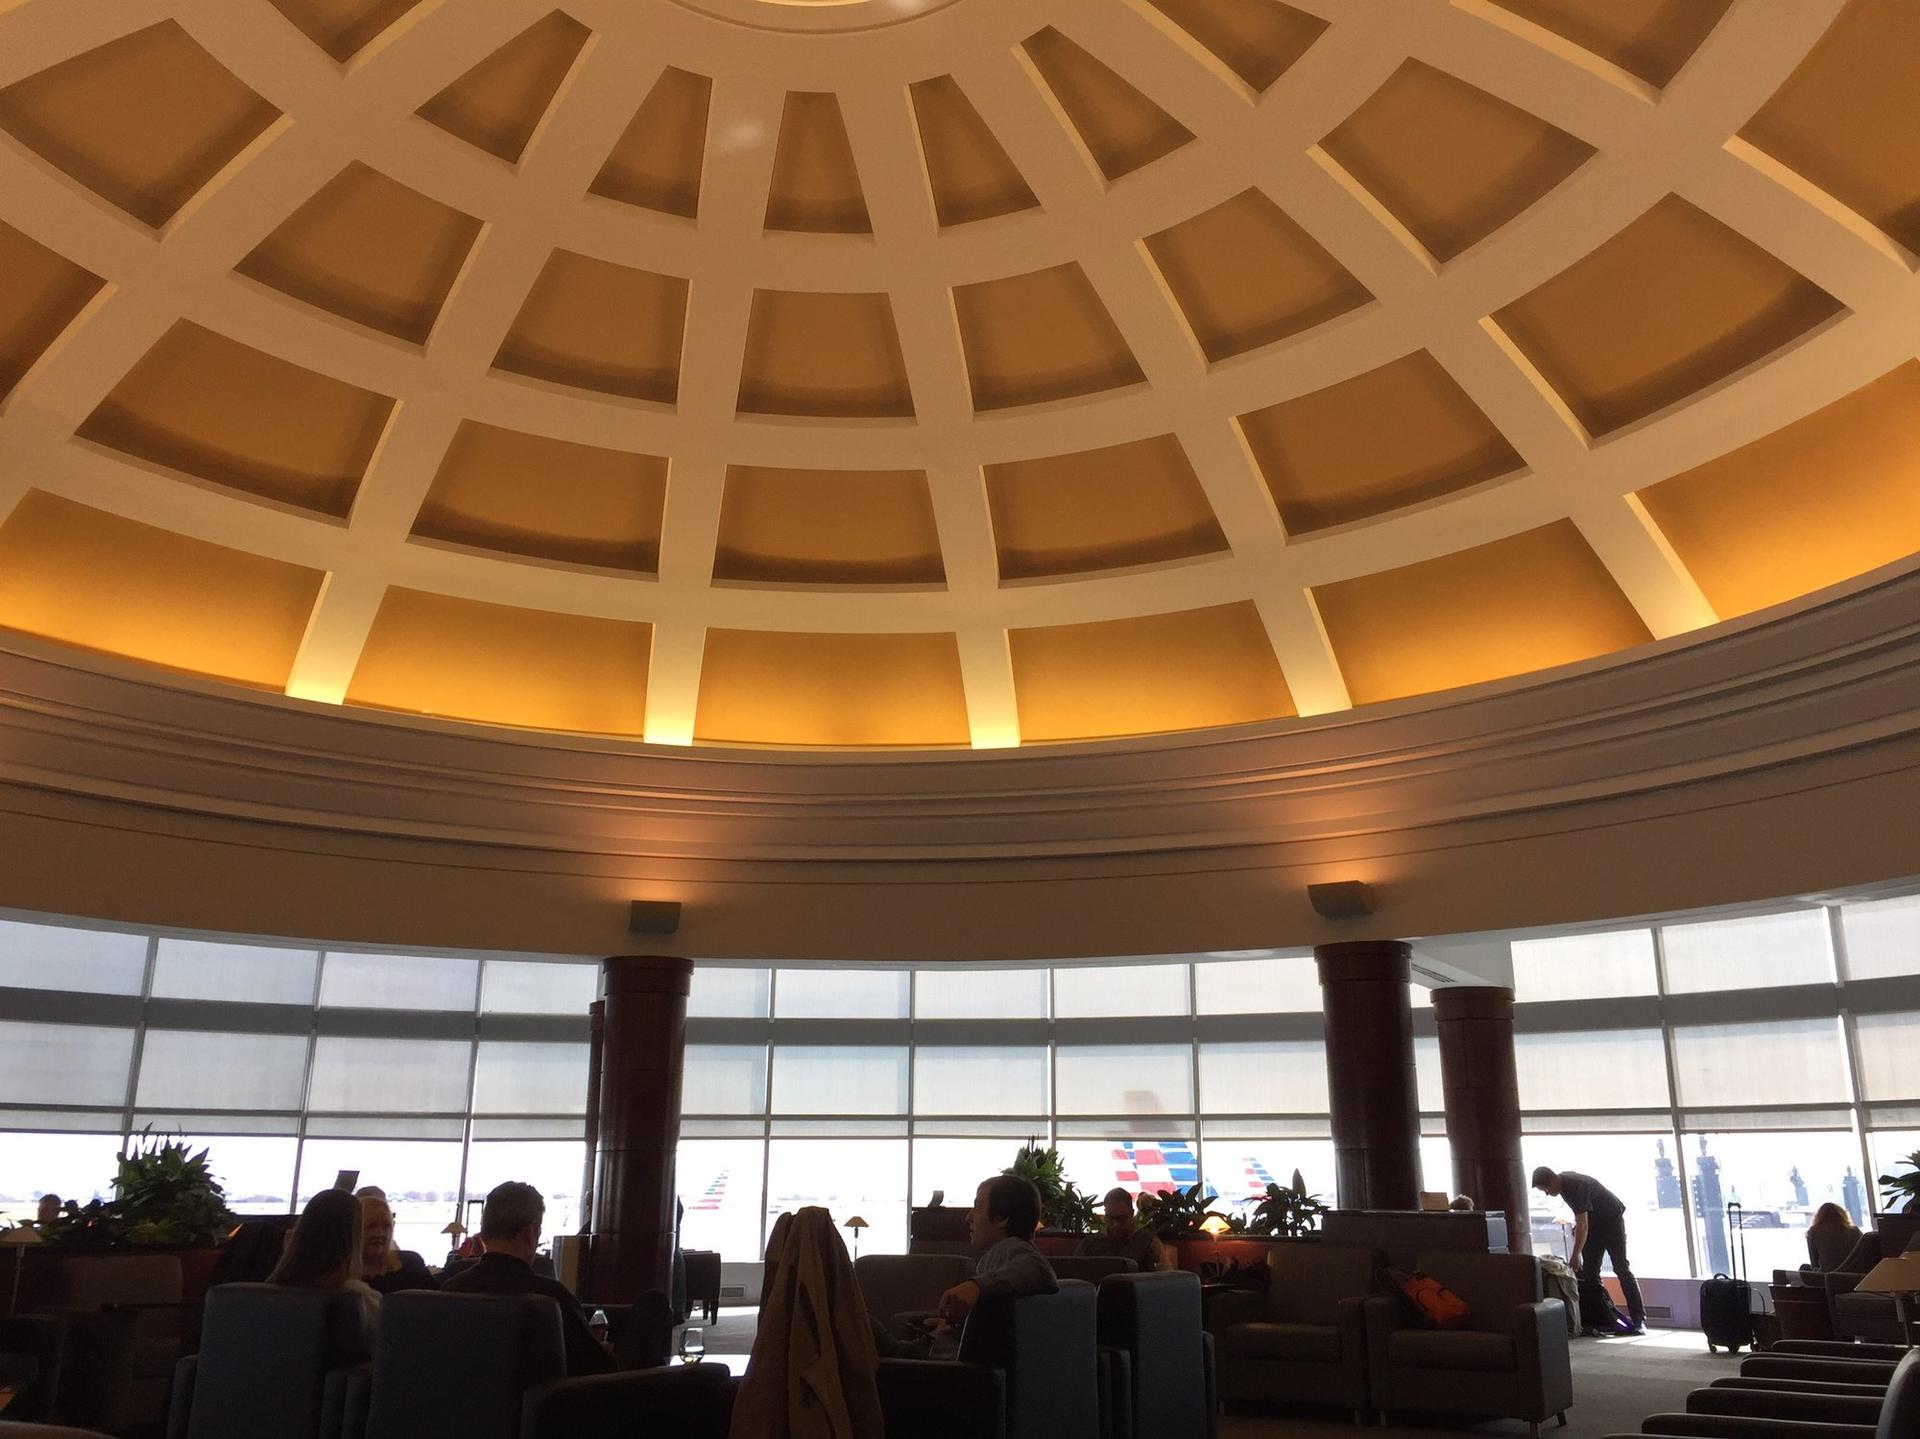 American Airlines Admirals Club image 33 of 37